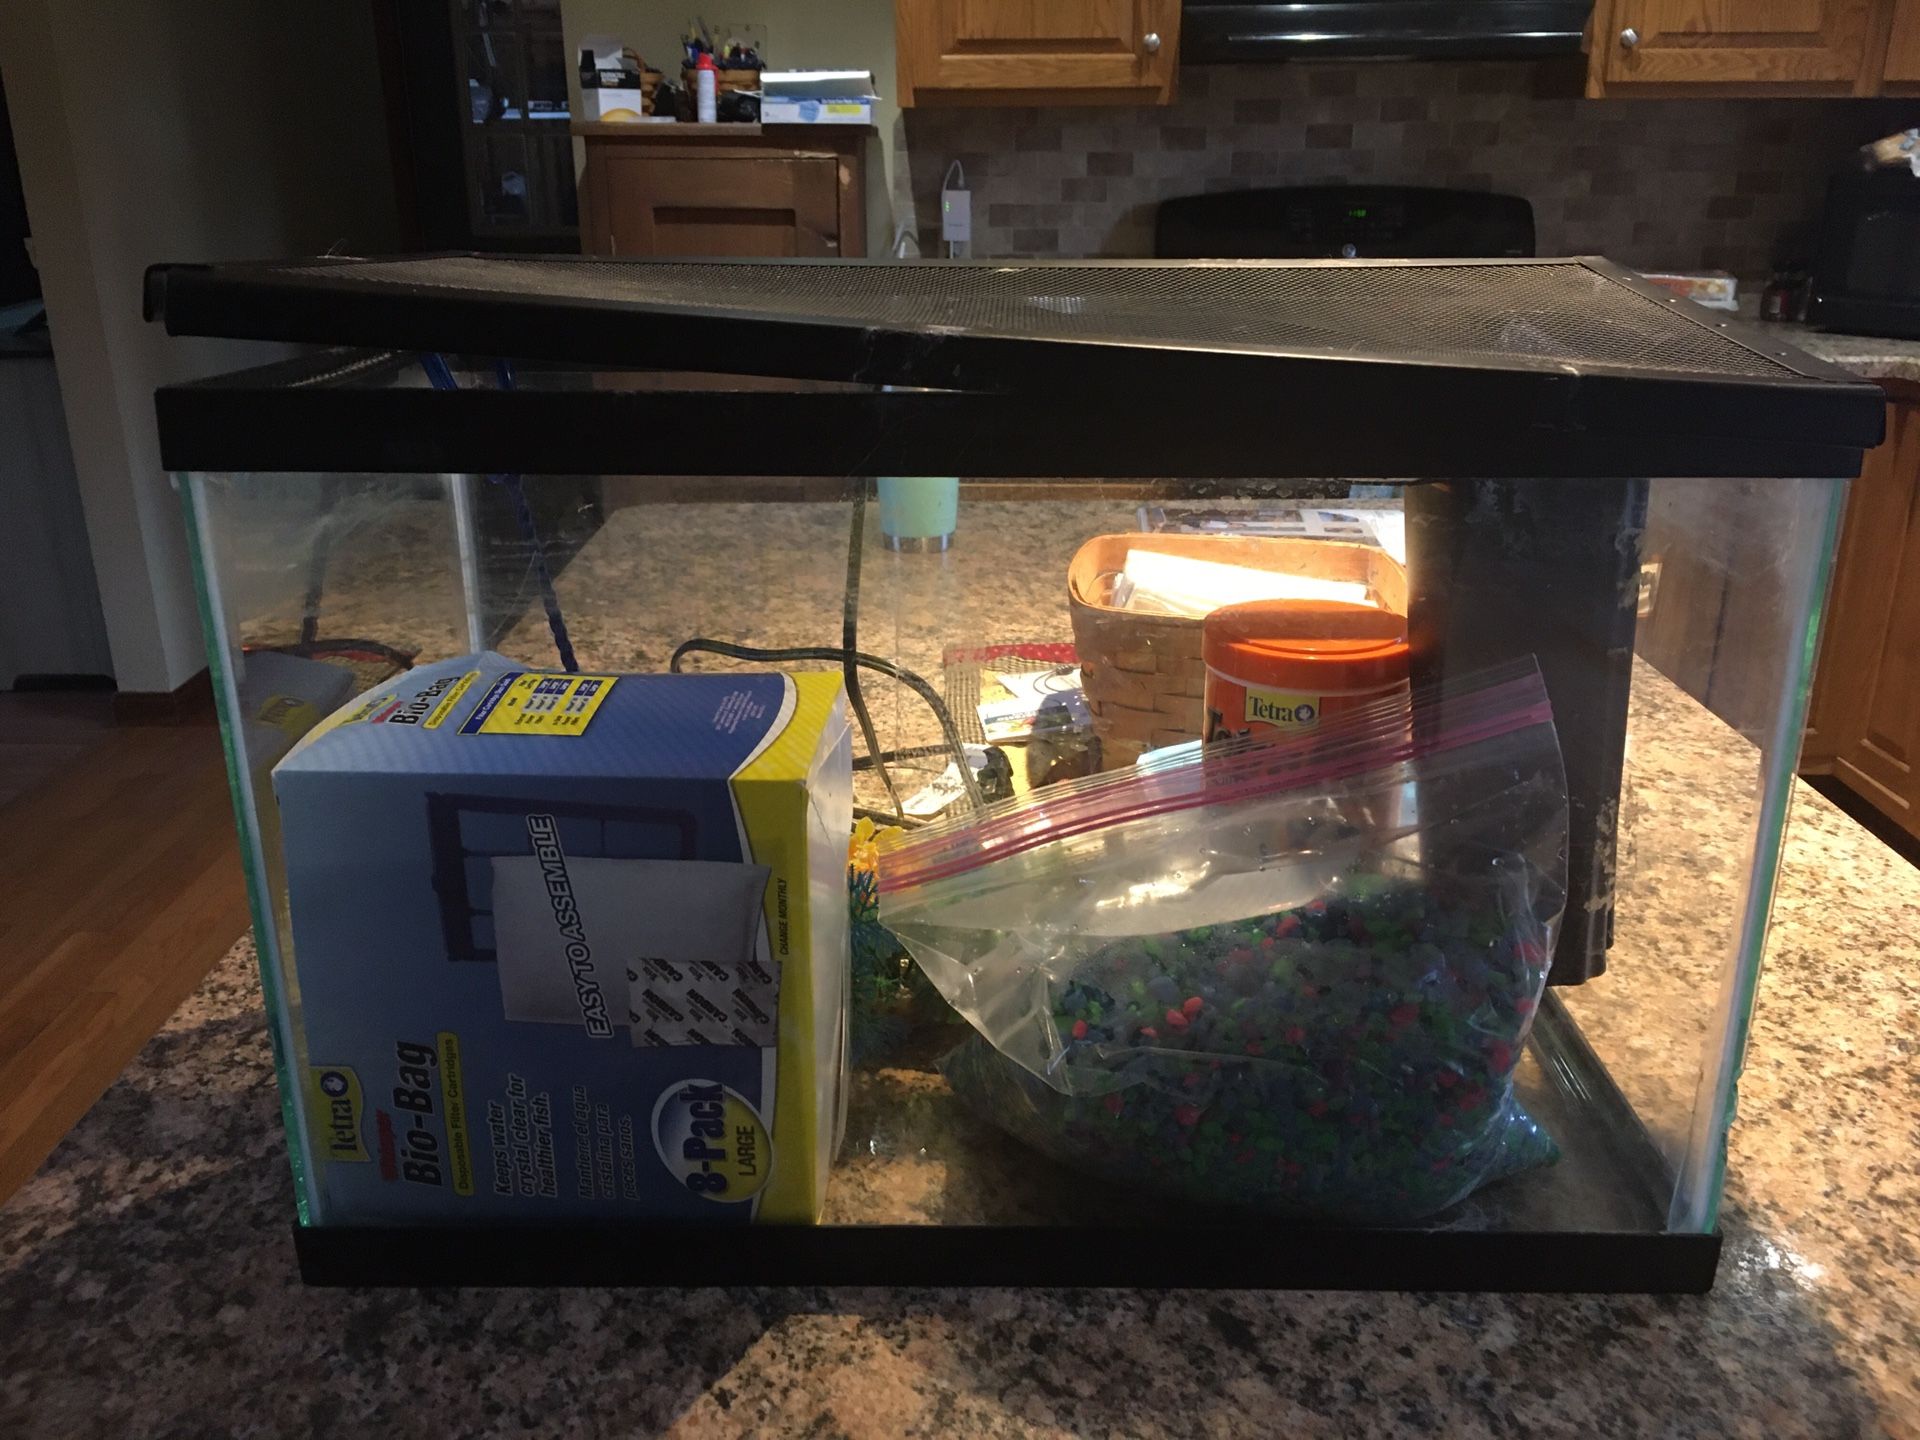 Fish tank and accessories